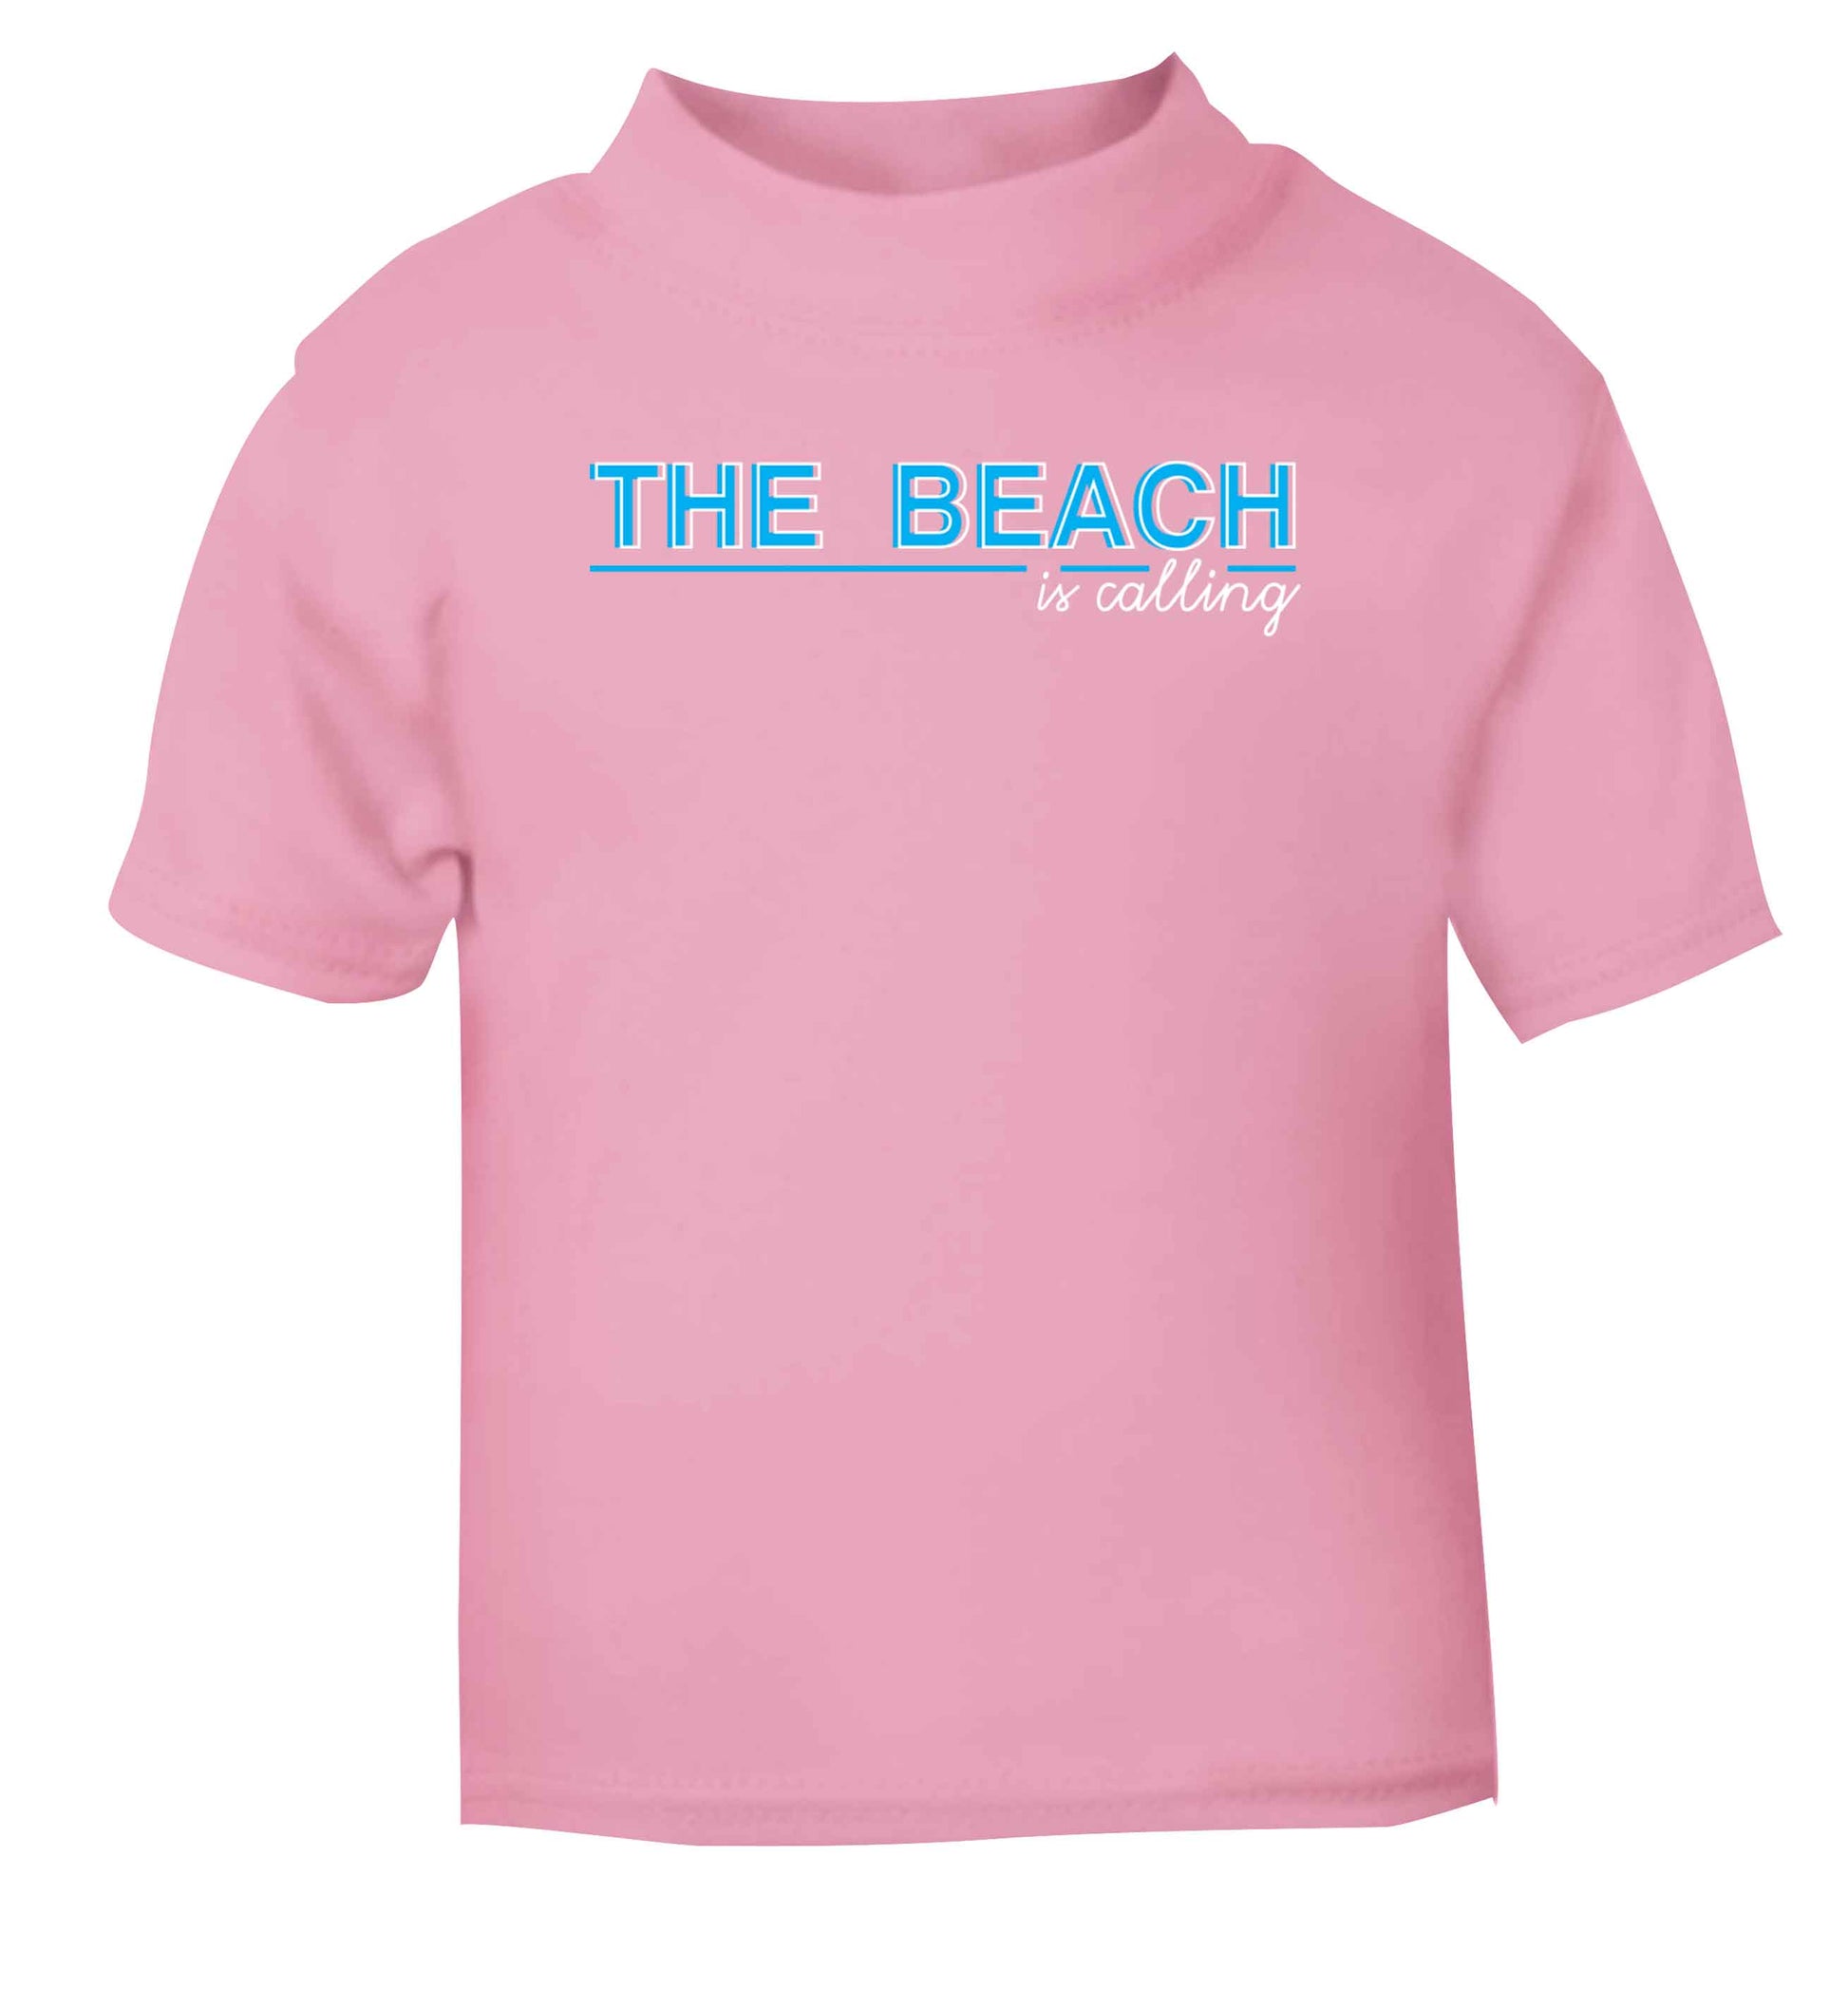 The beach is calling light pink Baby Toddler Tshirt 2 Years